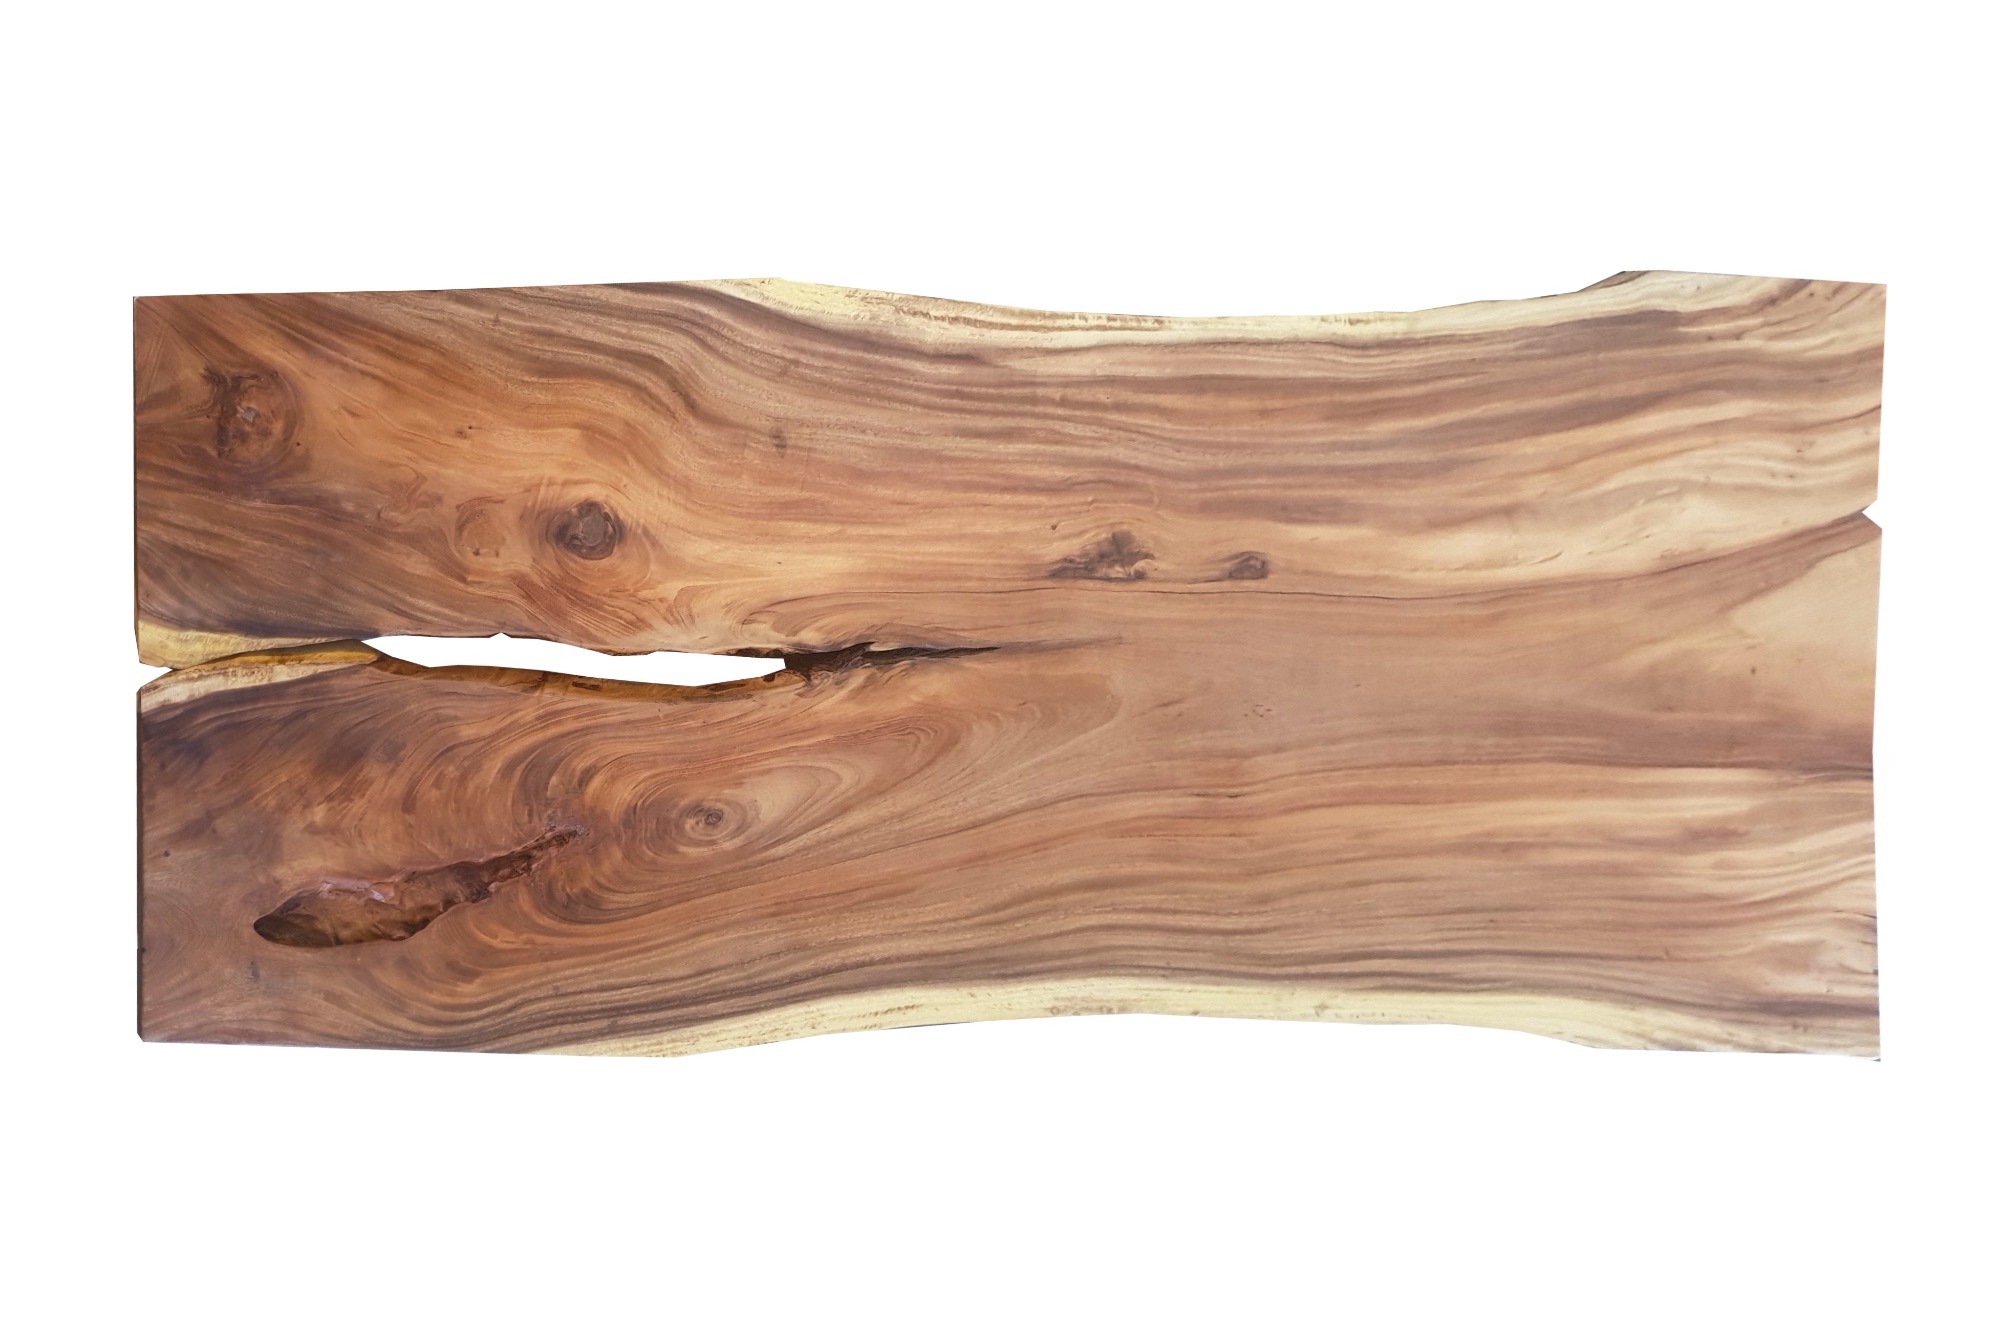 Buy Acacia Wood Live Edge Dining Table 118 x 47 − 43 − 46.5 Inches with ...